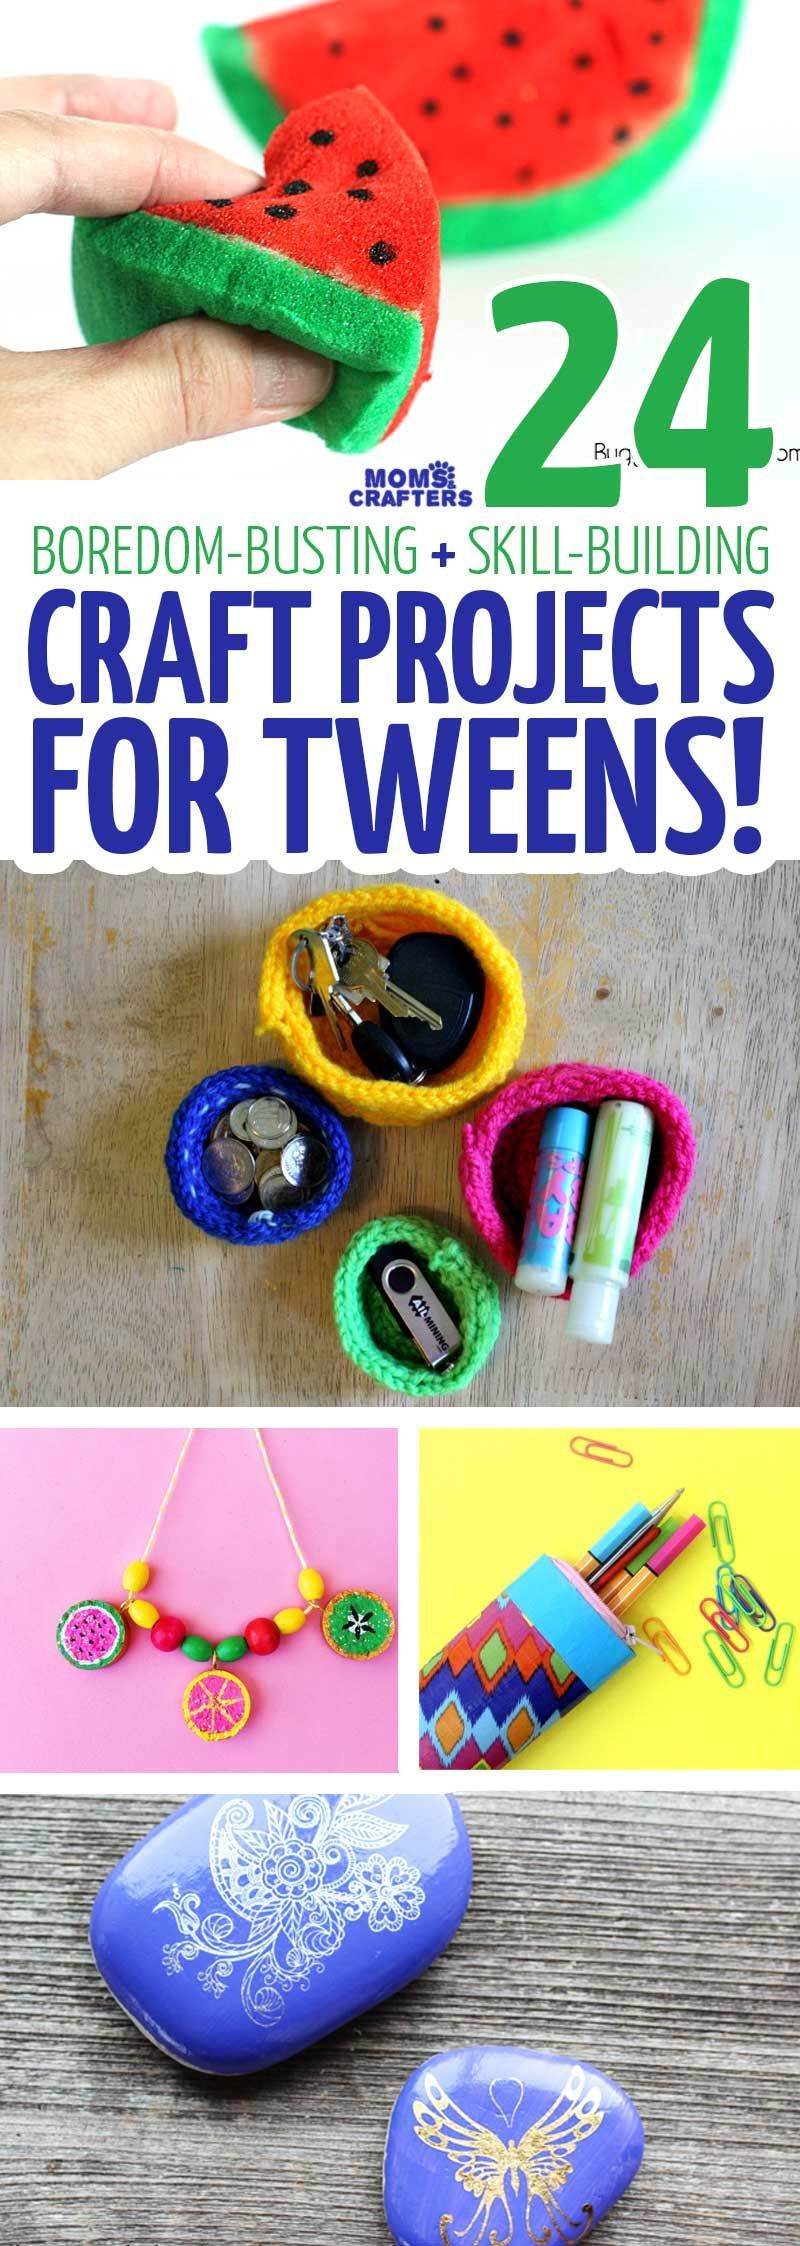 Craft Projects for Tweens - 24 Cool Crafts and Skills to Learn -   16 diy projects For Mom kids ideas